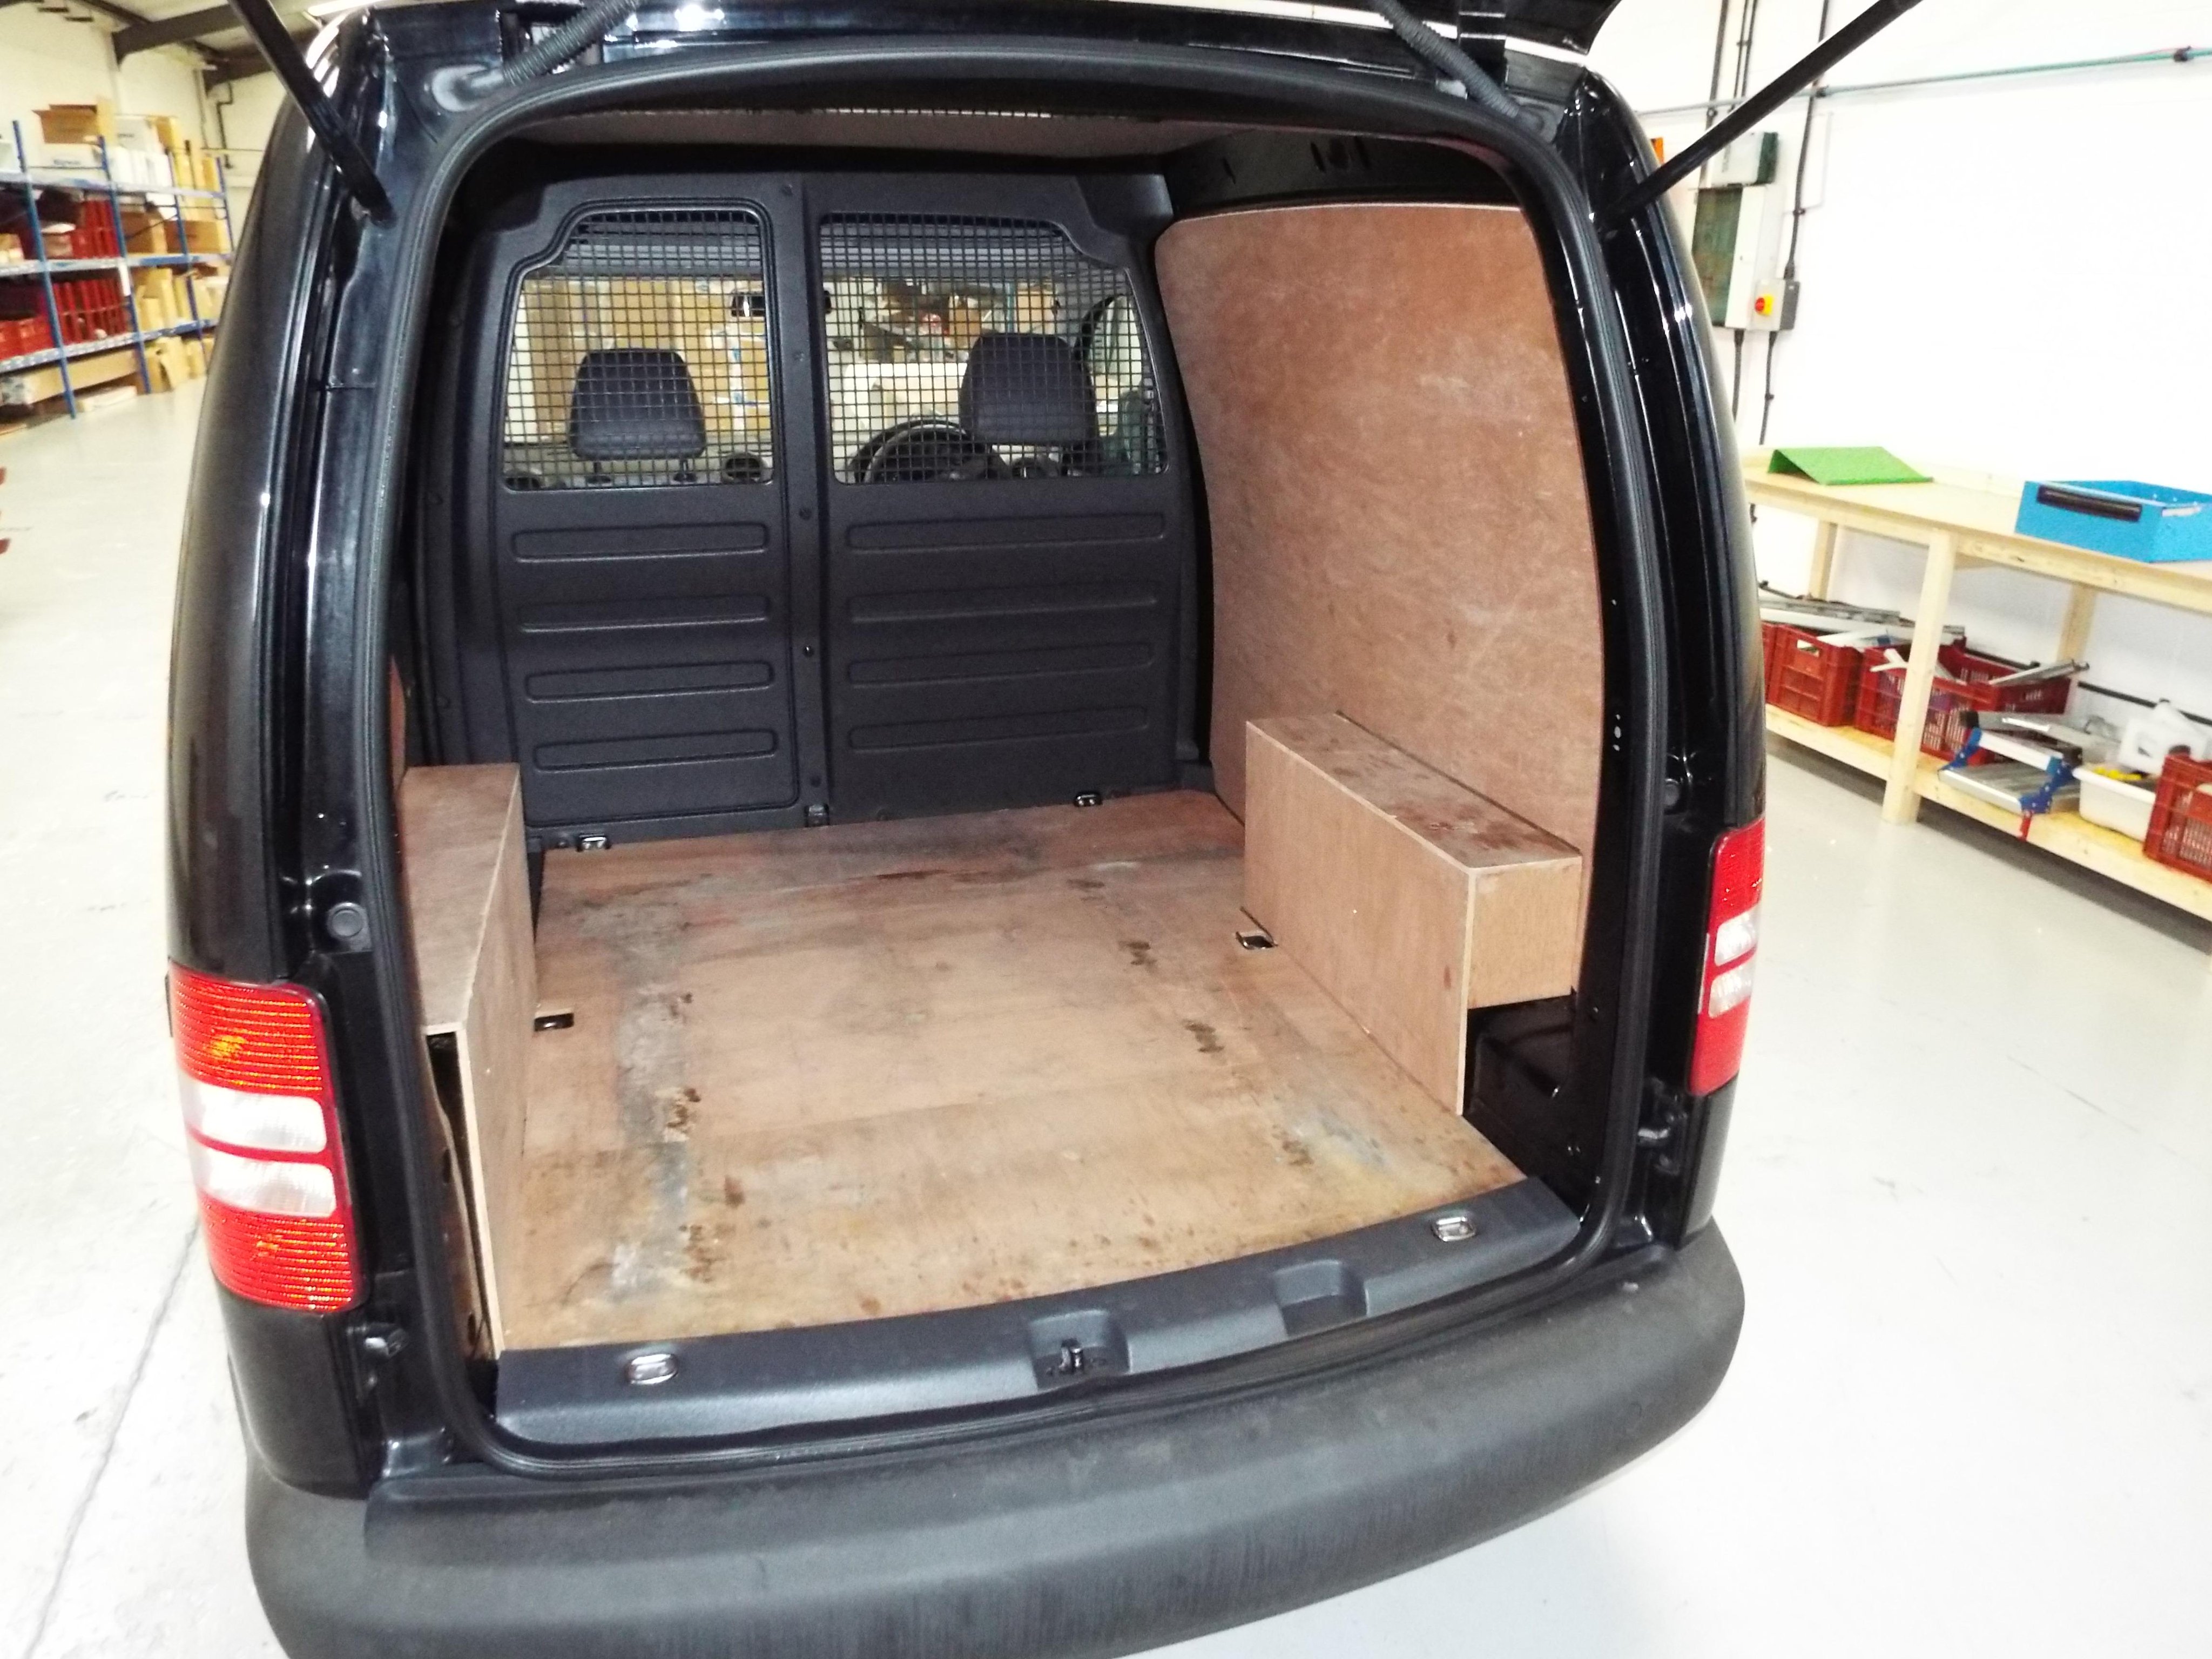 VanRackingSolutions on X: Volkswagen Caddy installed with it's new racking  system featuring underfloor storage. #VanRacking  / X